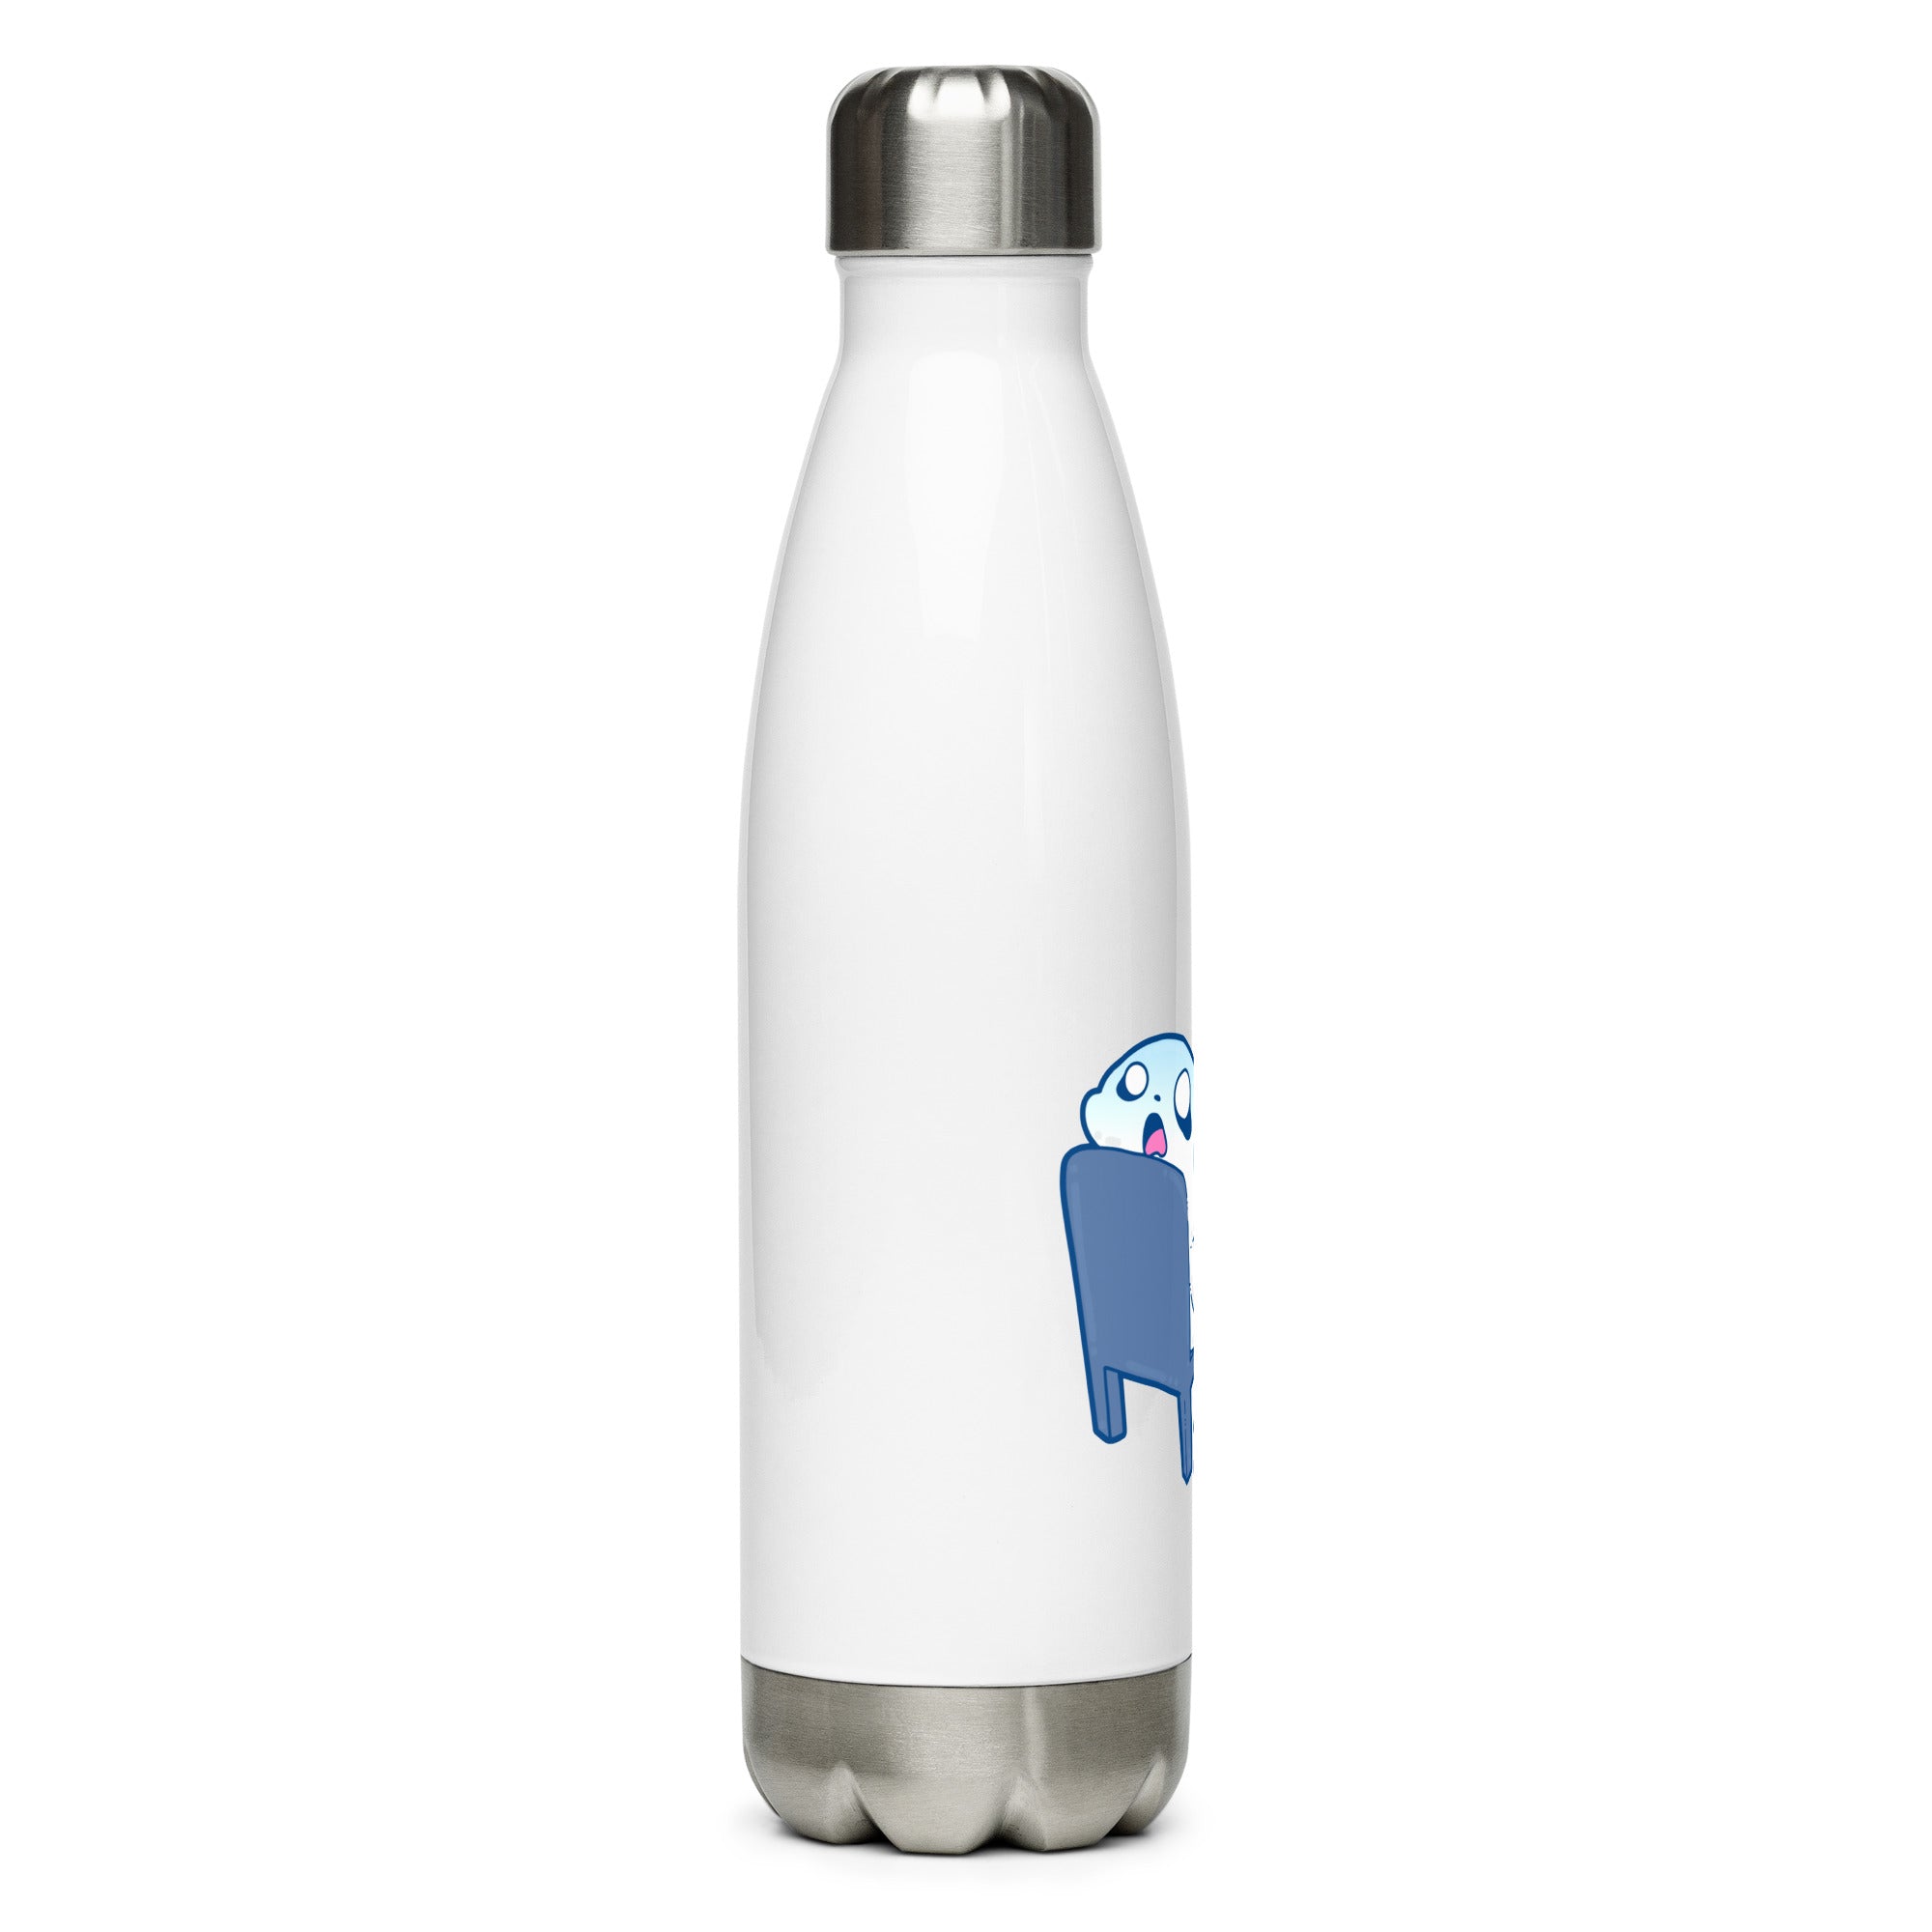 ALL THE THINGS I WANT TO DO - Stainless Steel Water Bottle